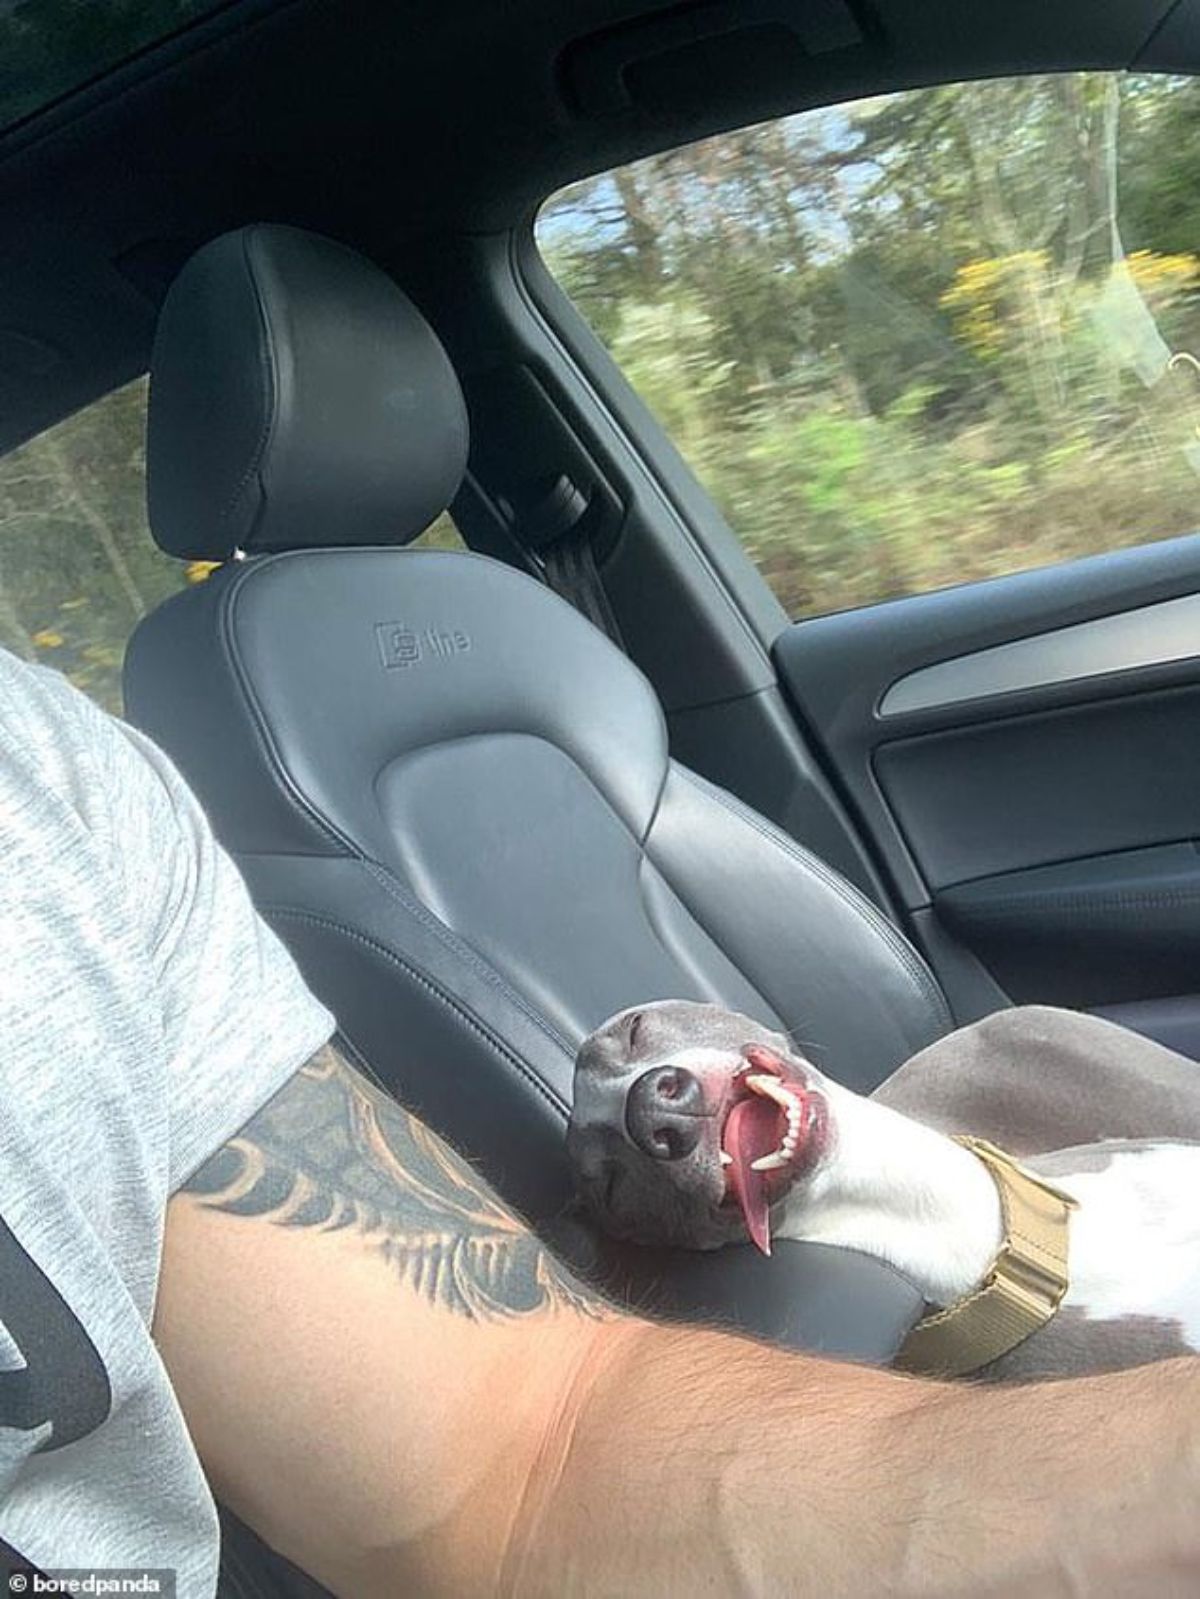 grey and white dog sleeping with the tongue on a passenger seat next to a man driving